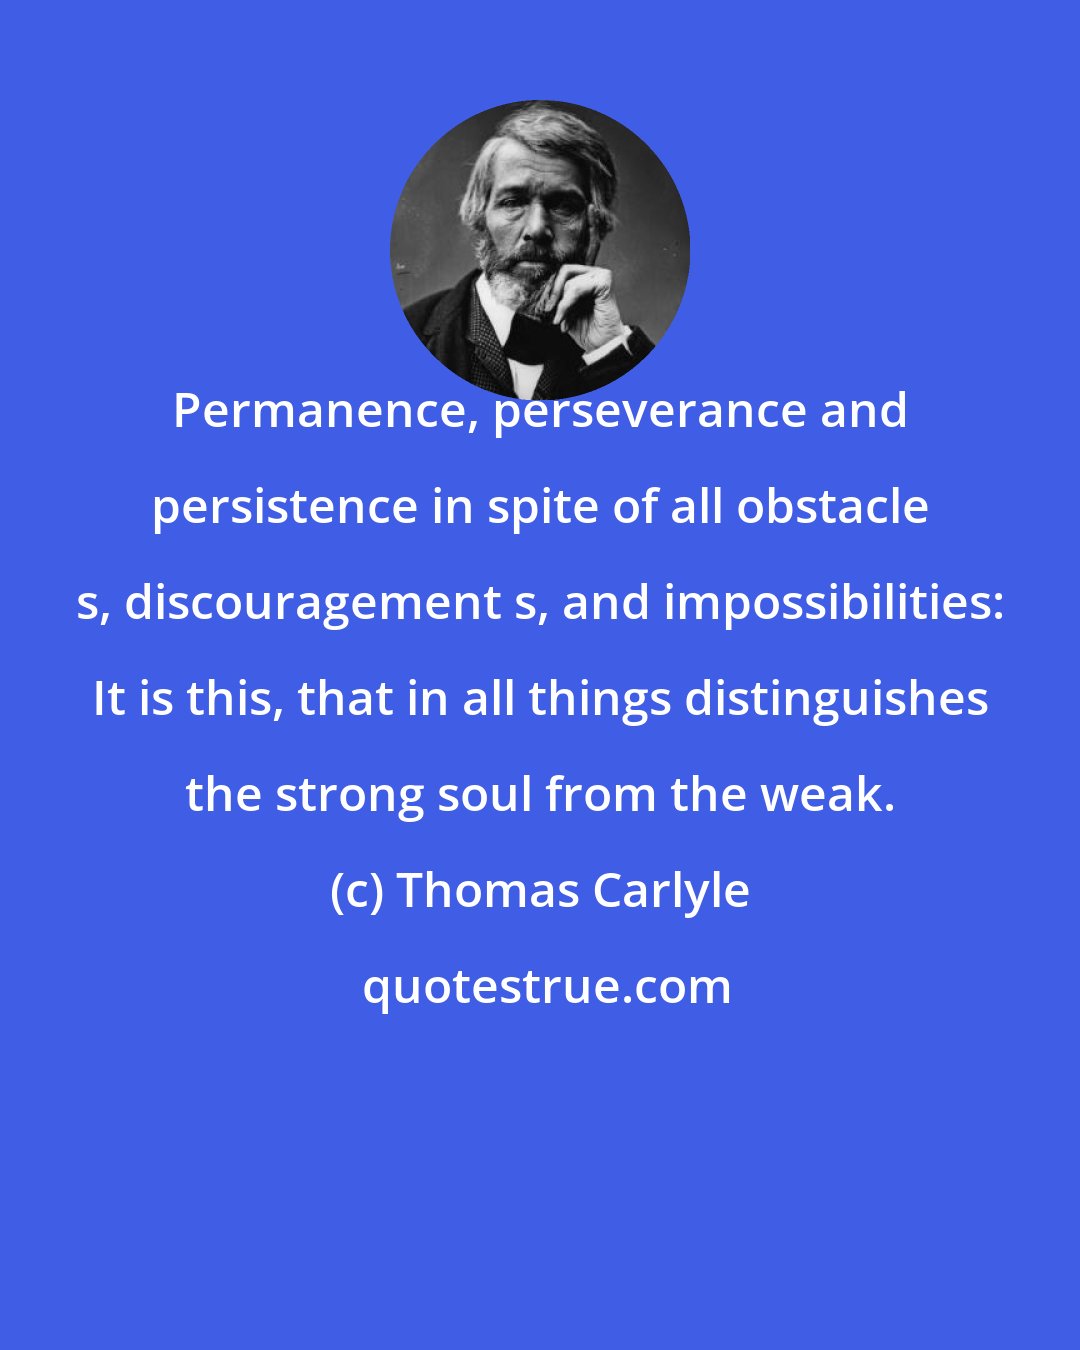 Thomas Carlyle: Permanence, perseverance and persistence in spite of all obstacle s, discouragement s, and impossibilities: It is this, that in all things distinguishes the strong soul from the weak.